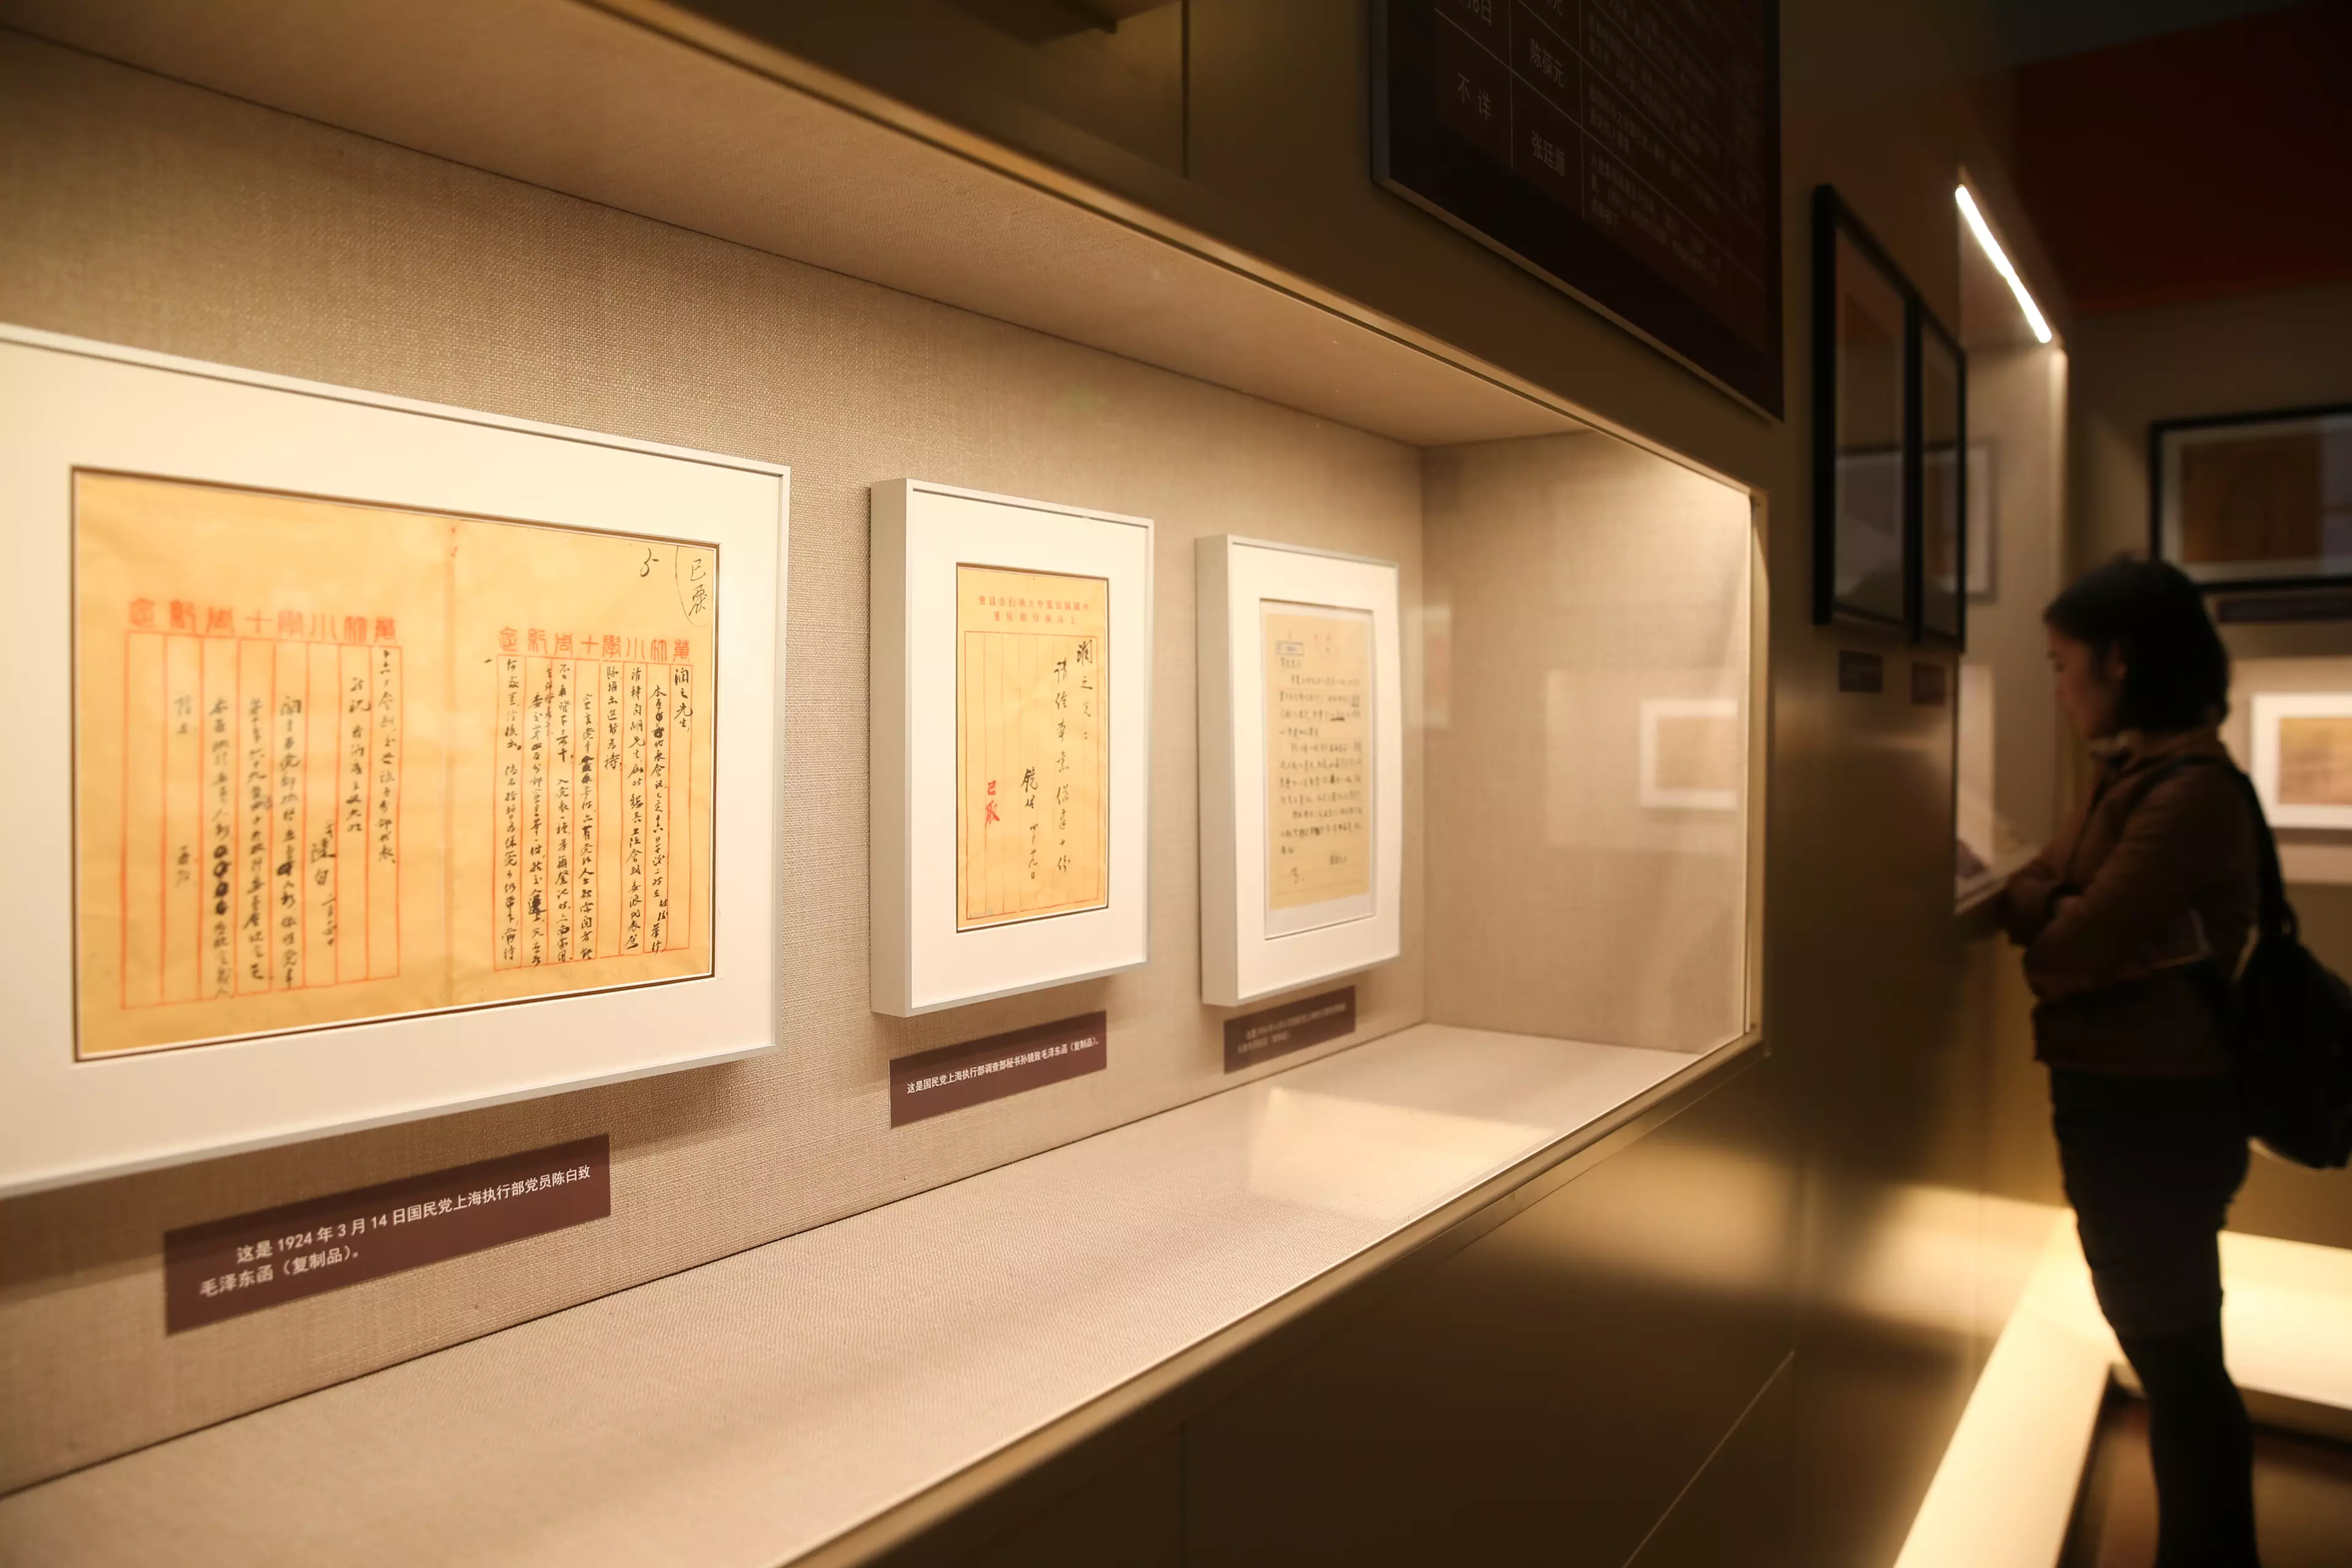 Mao Zedong's former residence is now a museum with exhibits on show from his work.